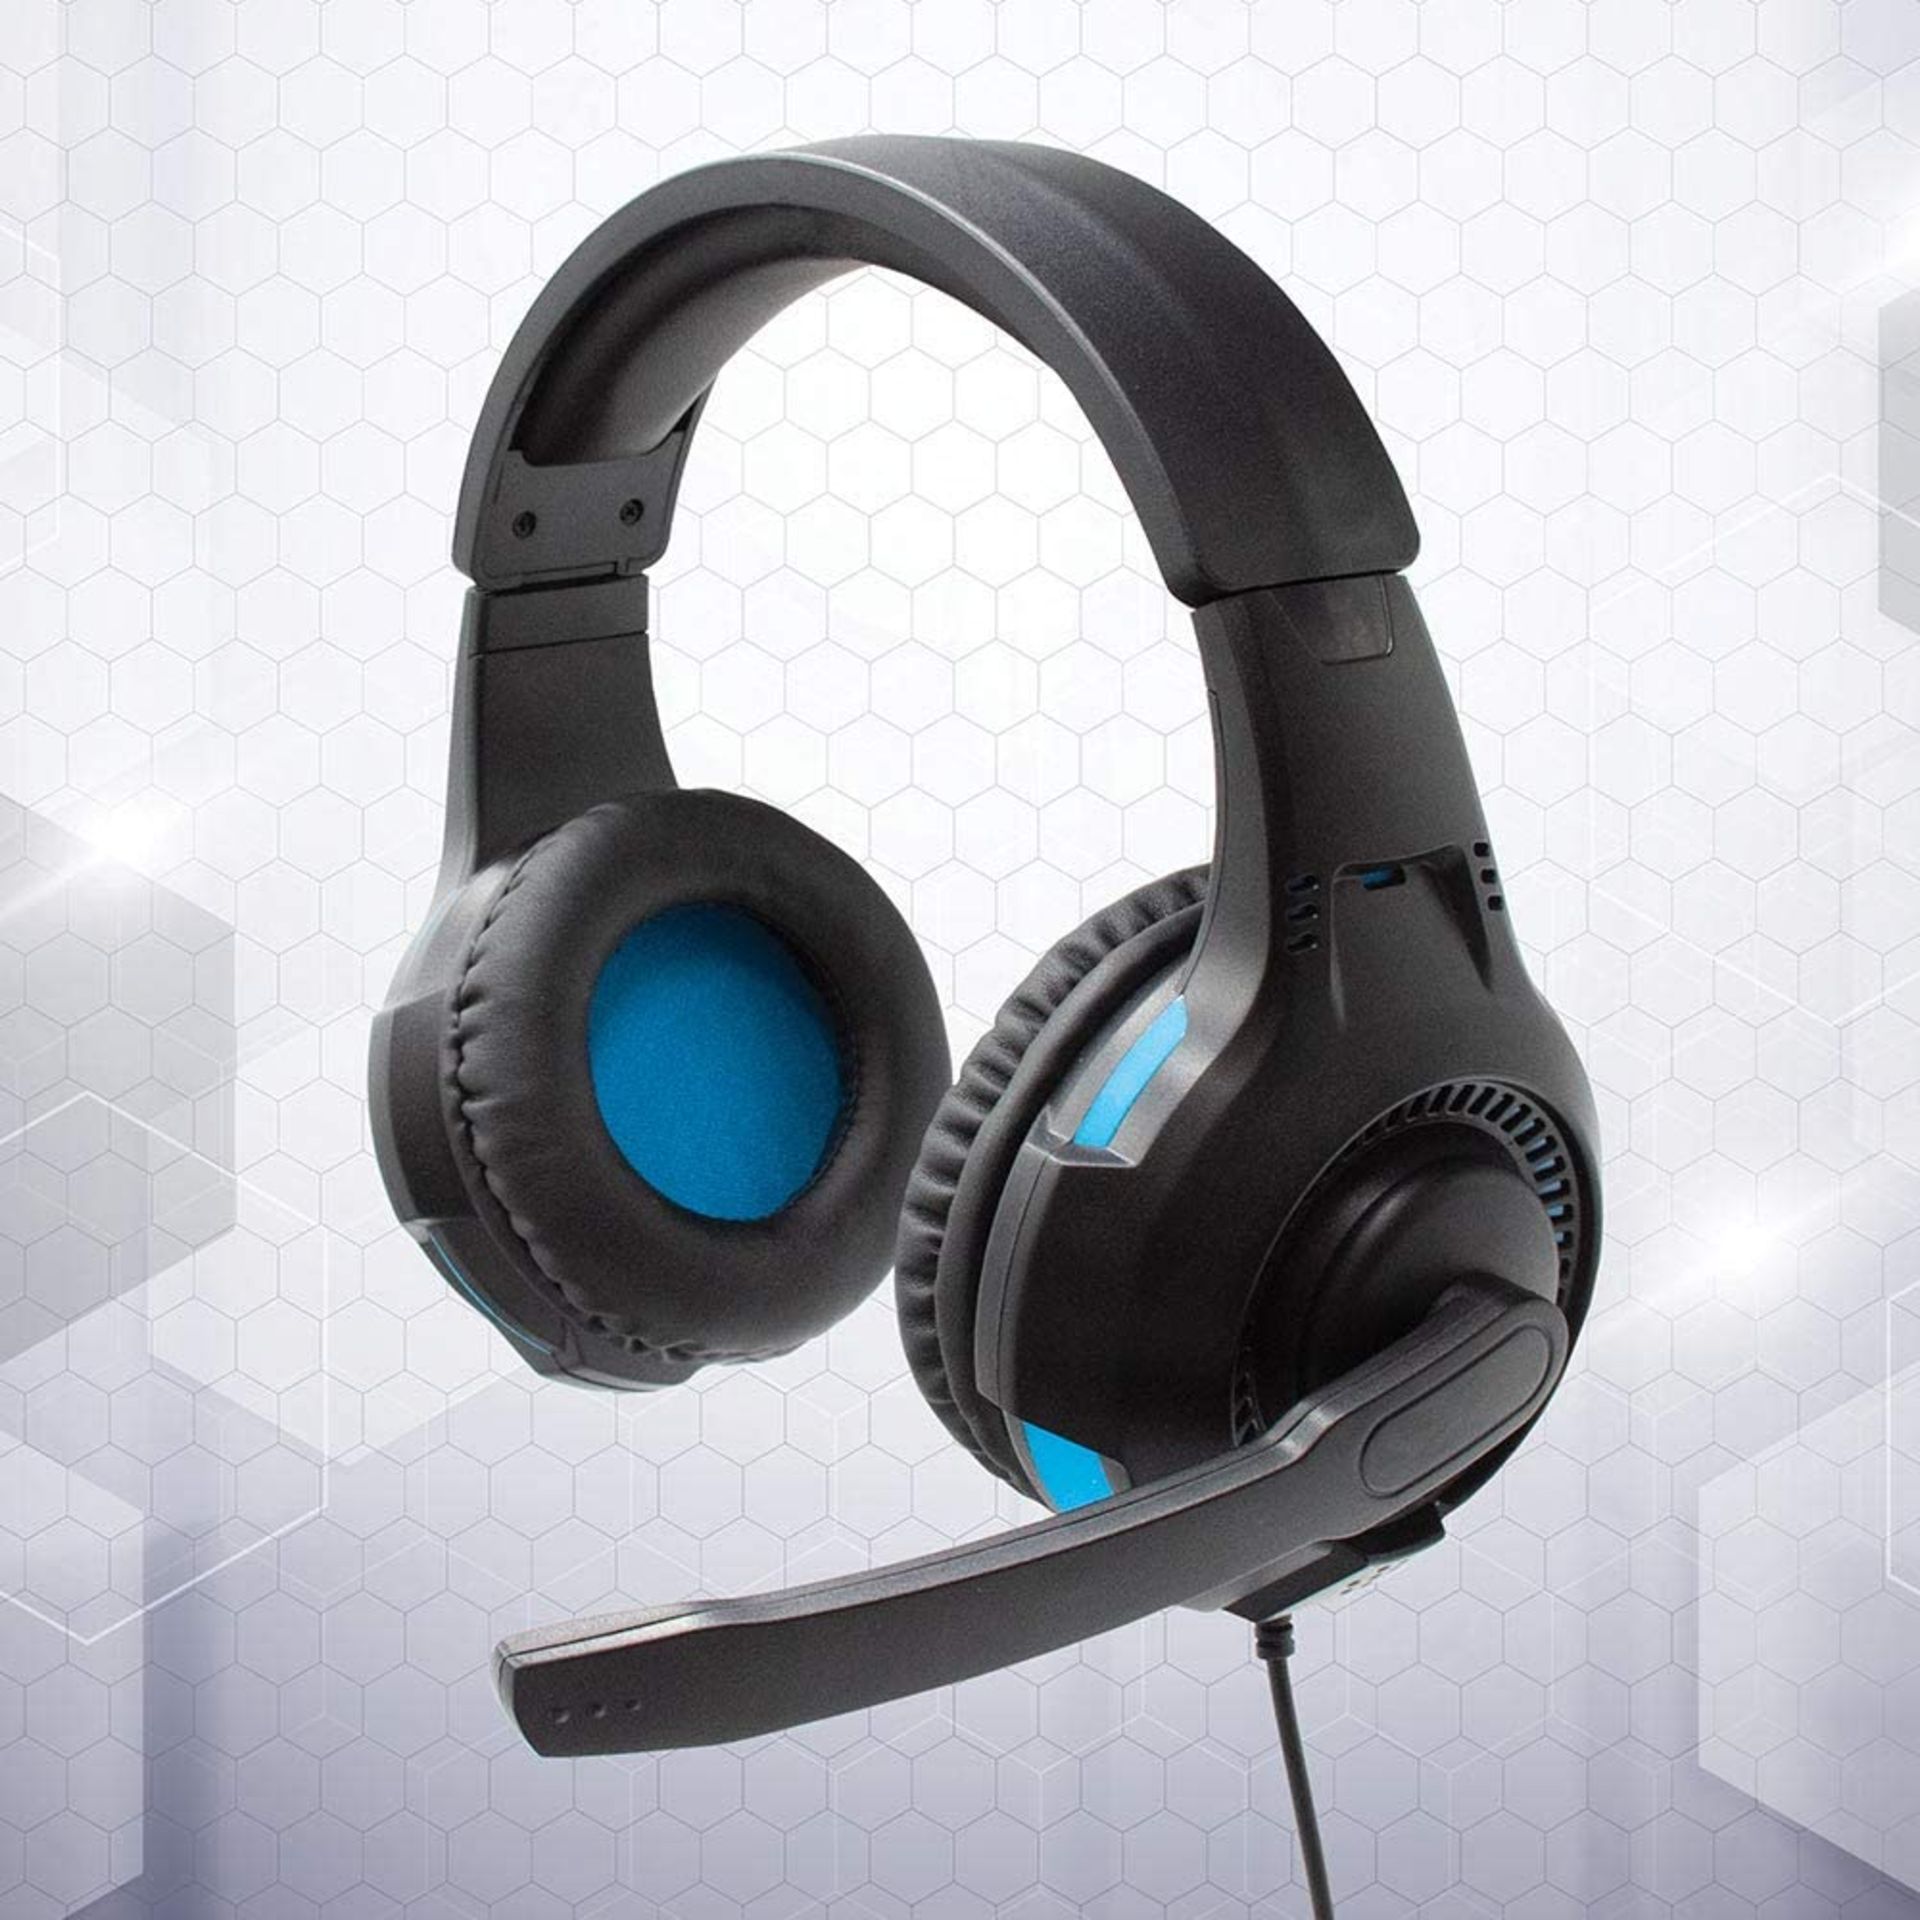 2 x RED5 Gaming Comet Headphones. - BW. It’s a soft cushioned blue gaming headset! Features a fold